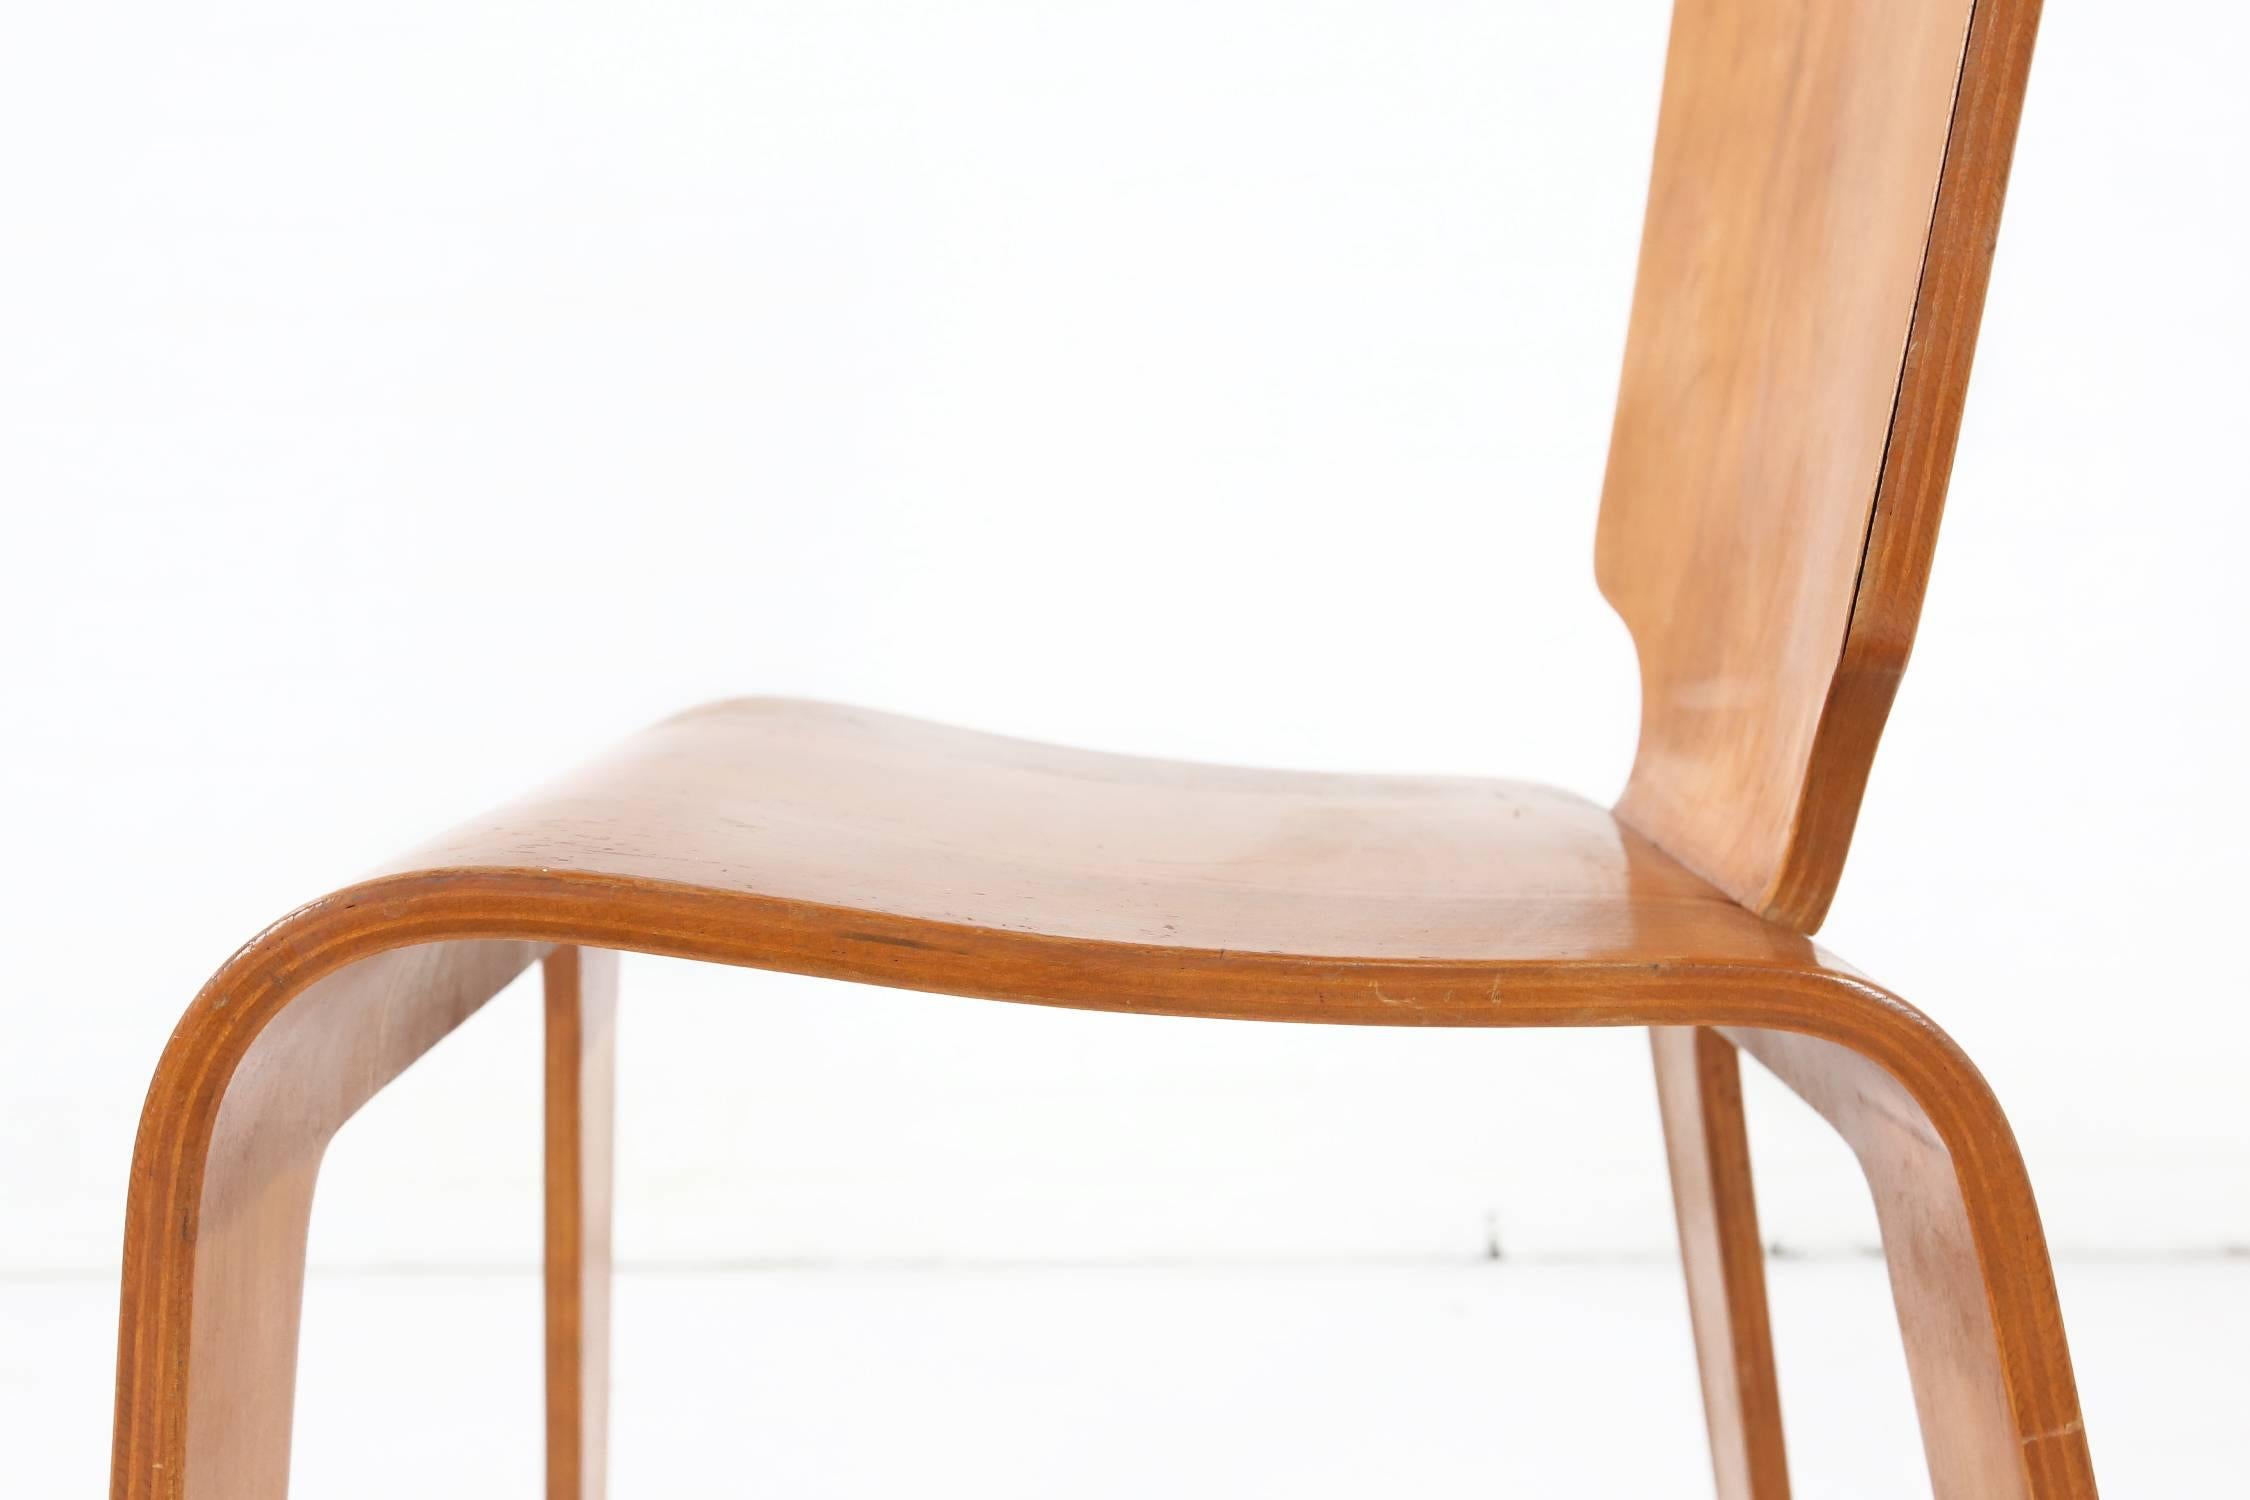 American Bent Plywood Side Chair by Thaden-Jordan Furniture, 1940s / Han Pieck Style